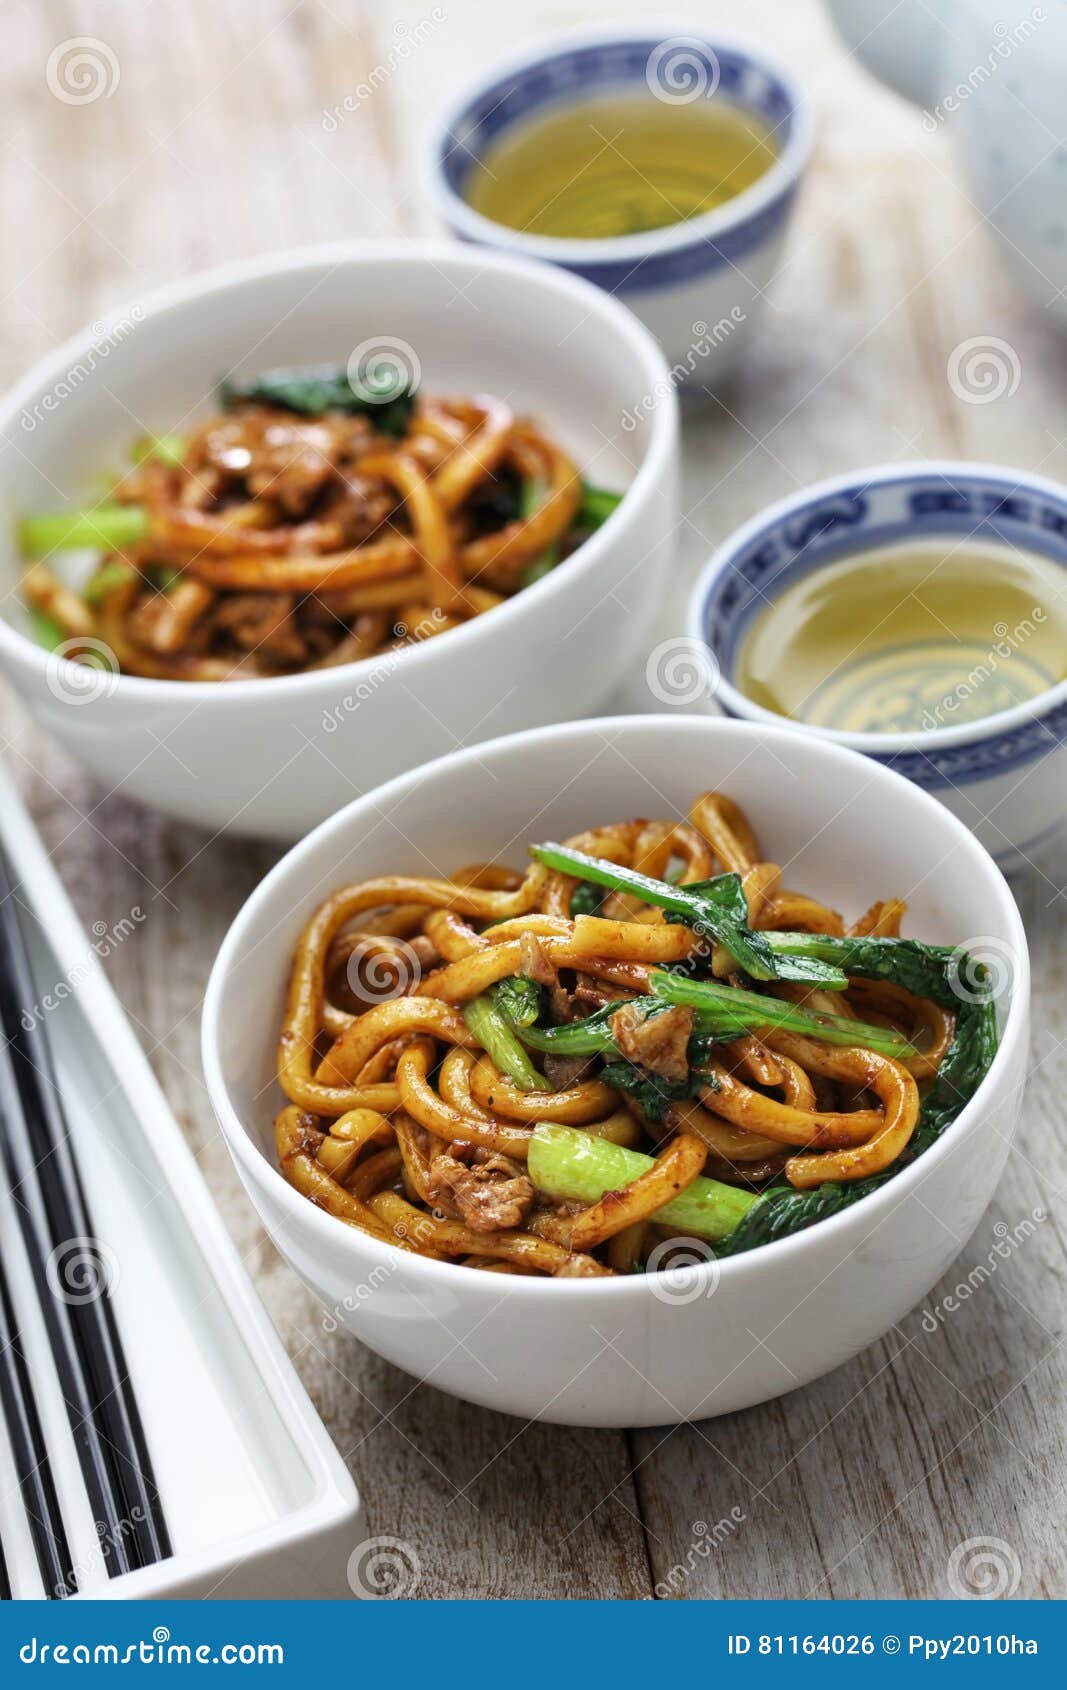 Shanghai Fried Noodle, Shanghai Chow Mein Stock Photo - Image of fried ...